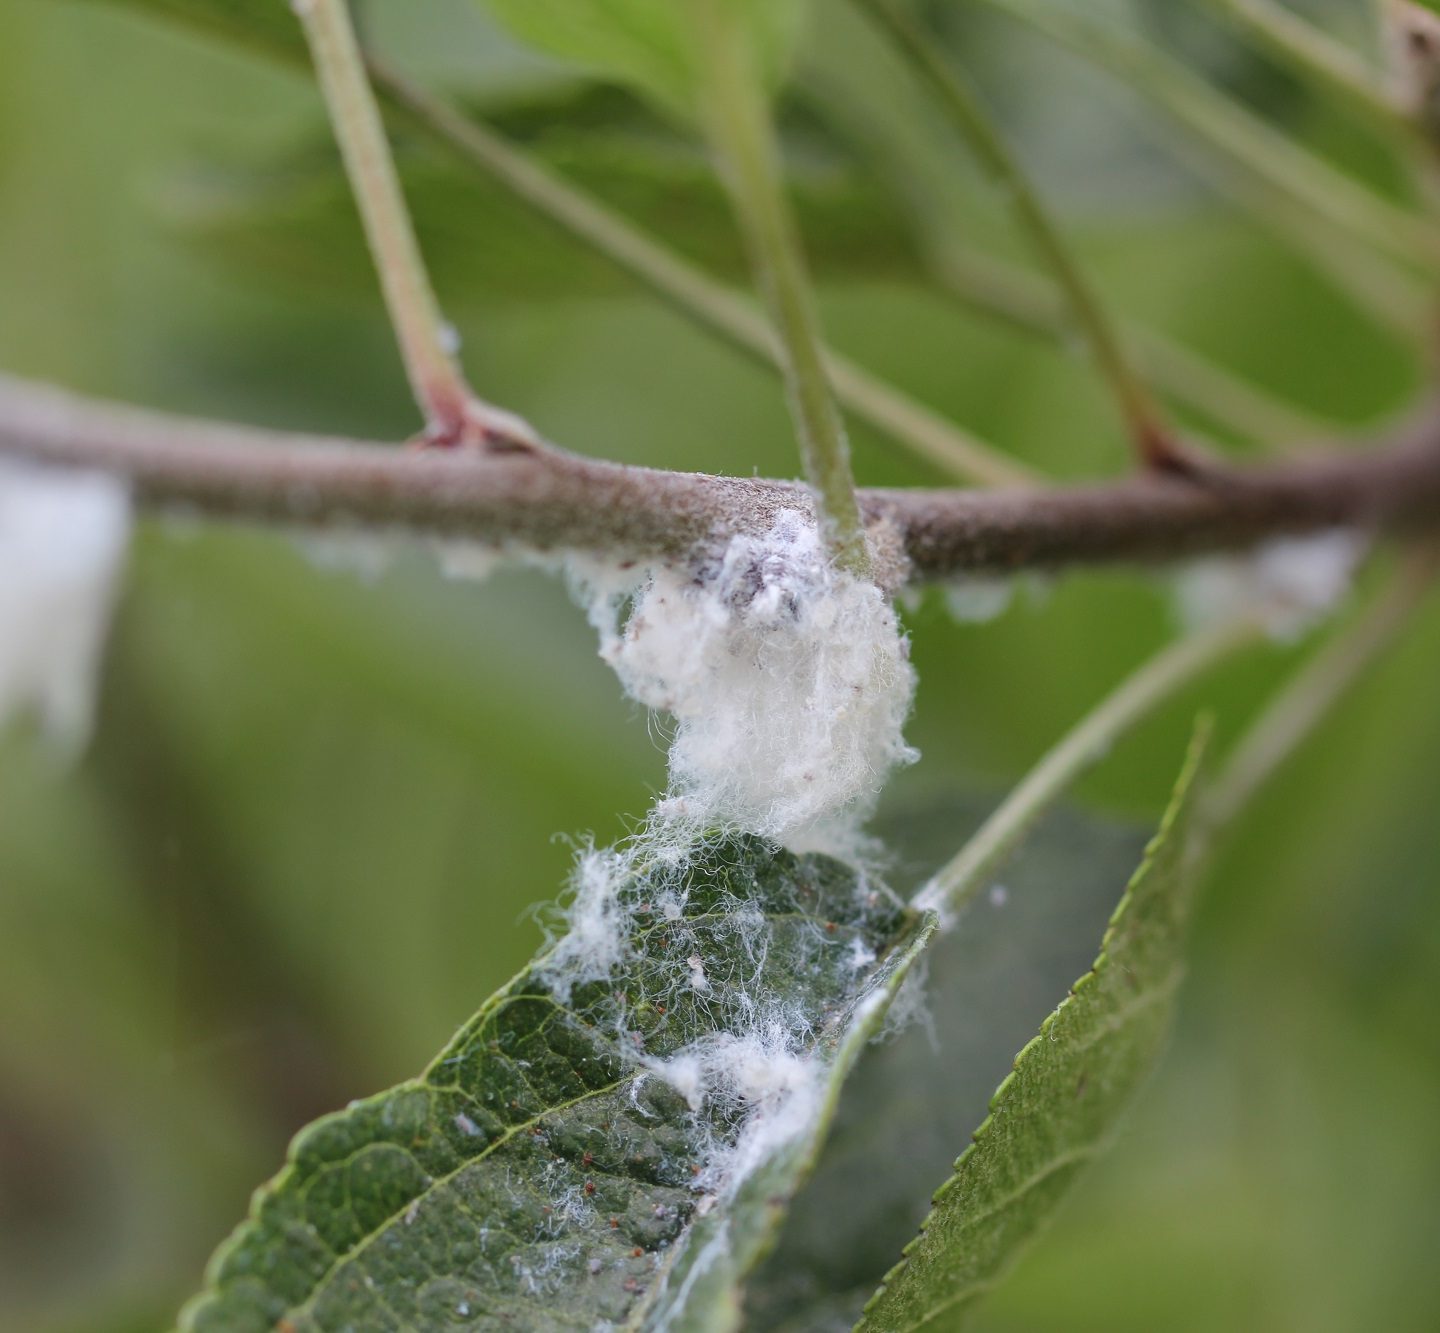 Woolly aphid